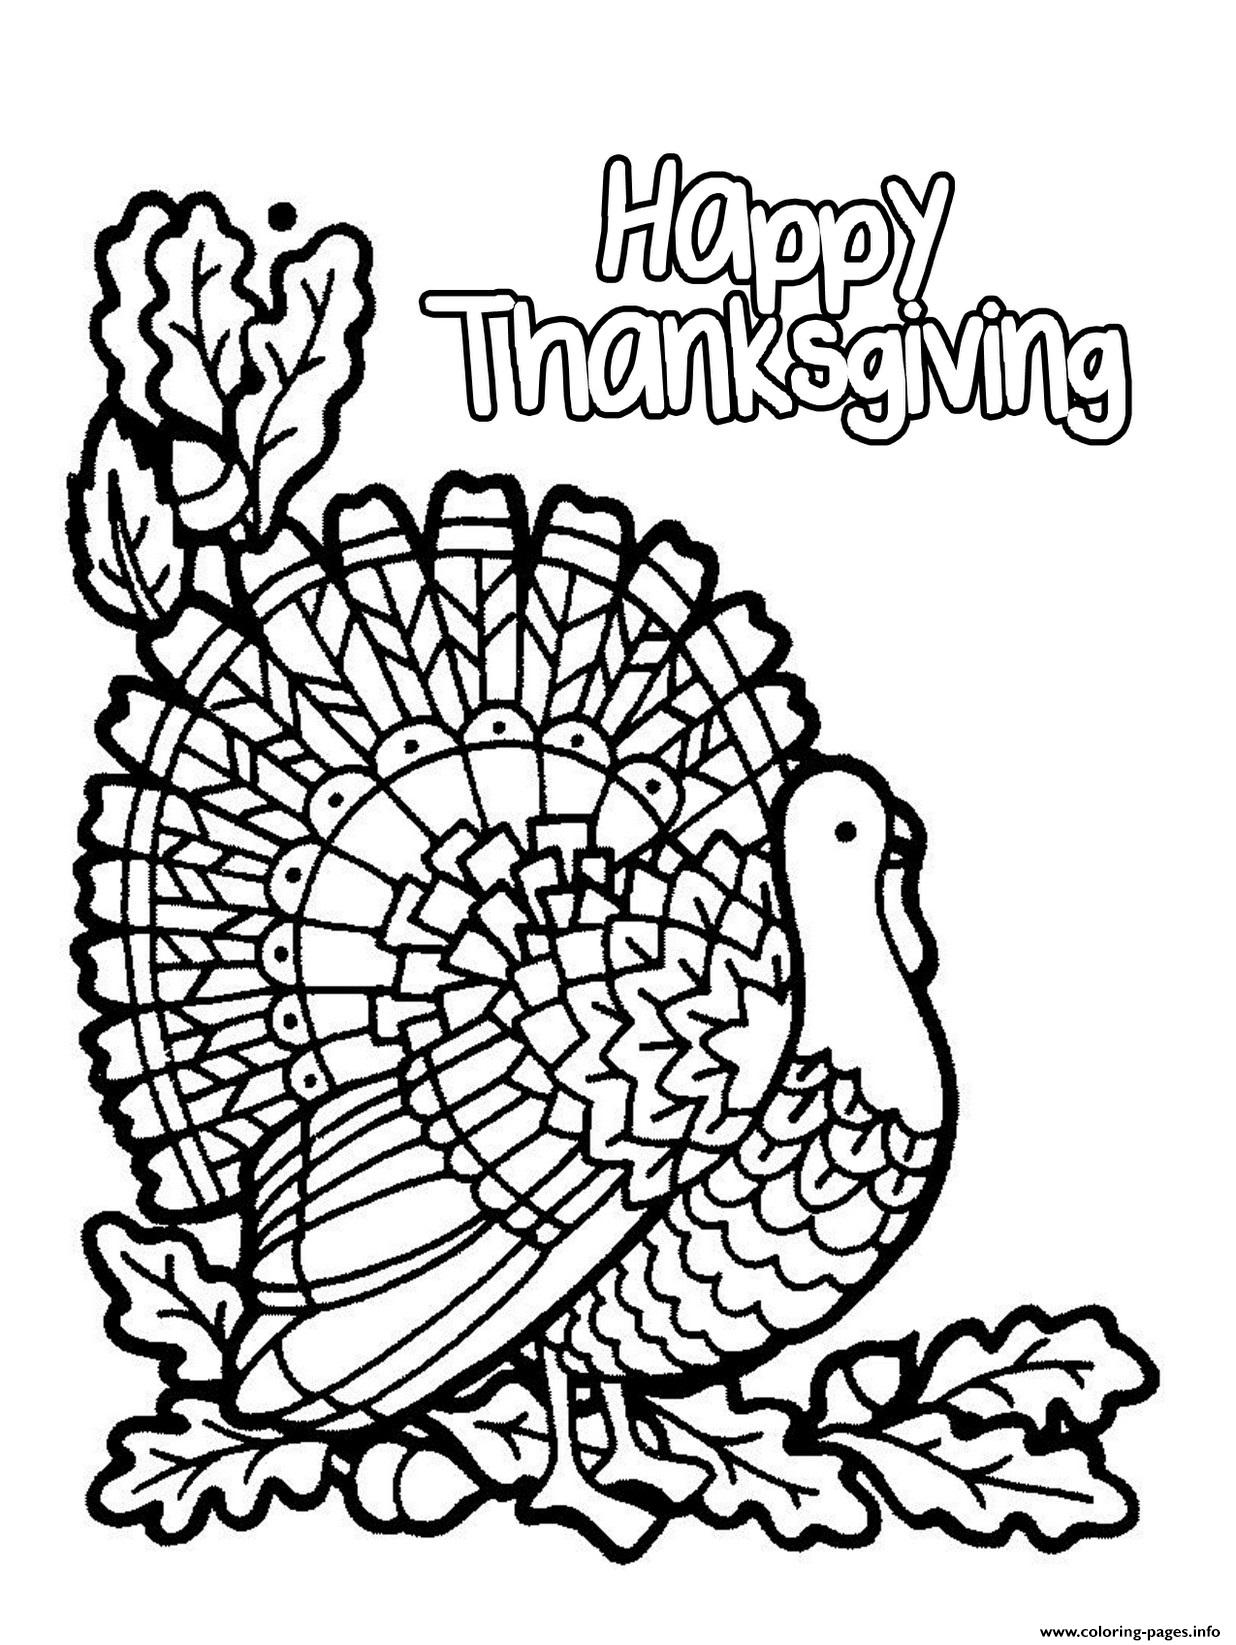 Happy Thanksgiving Turkey coloring pages